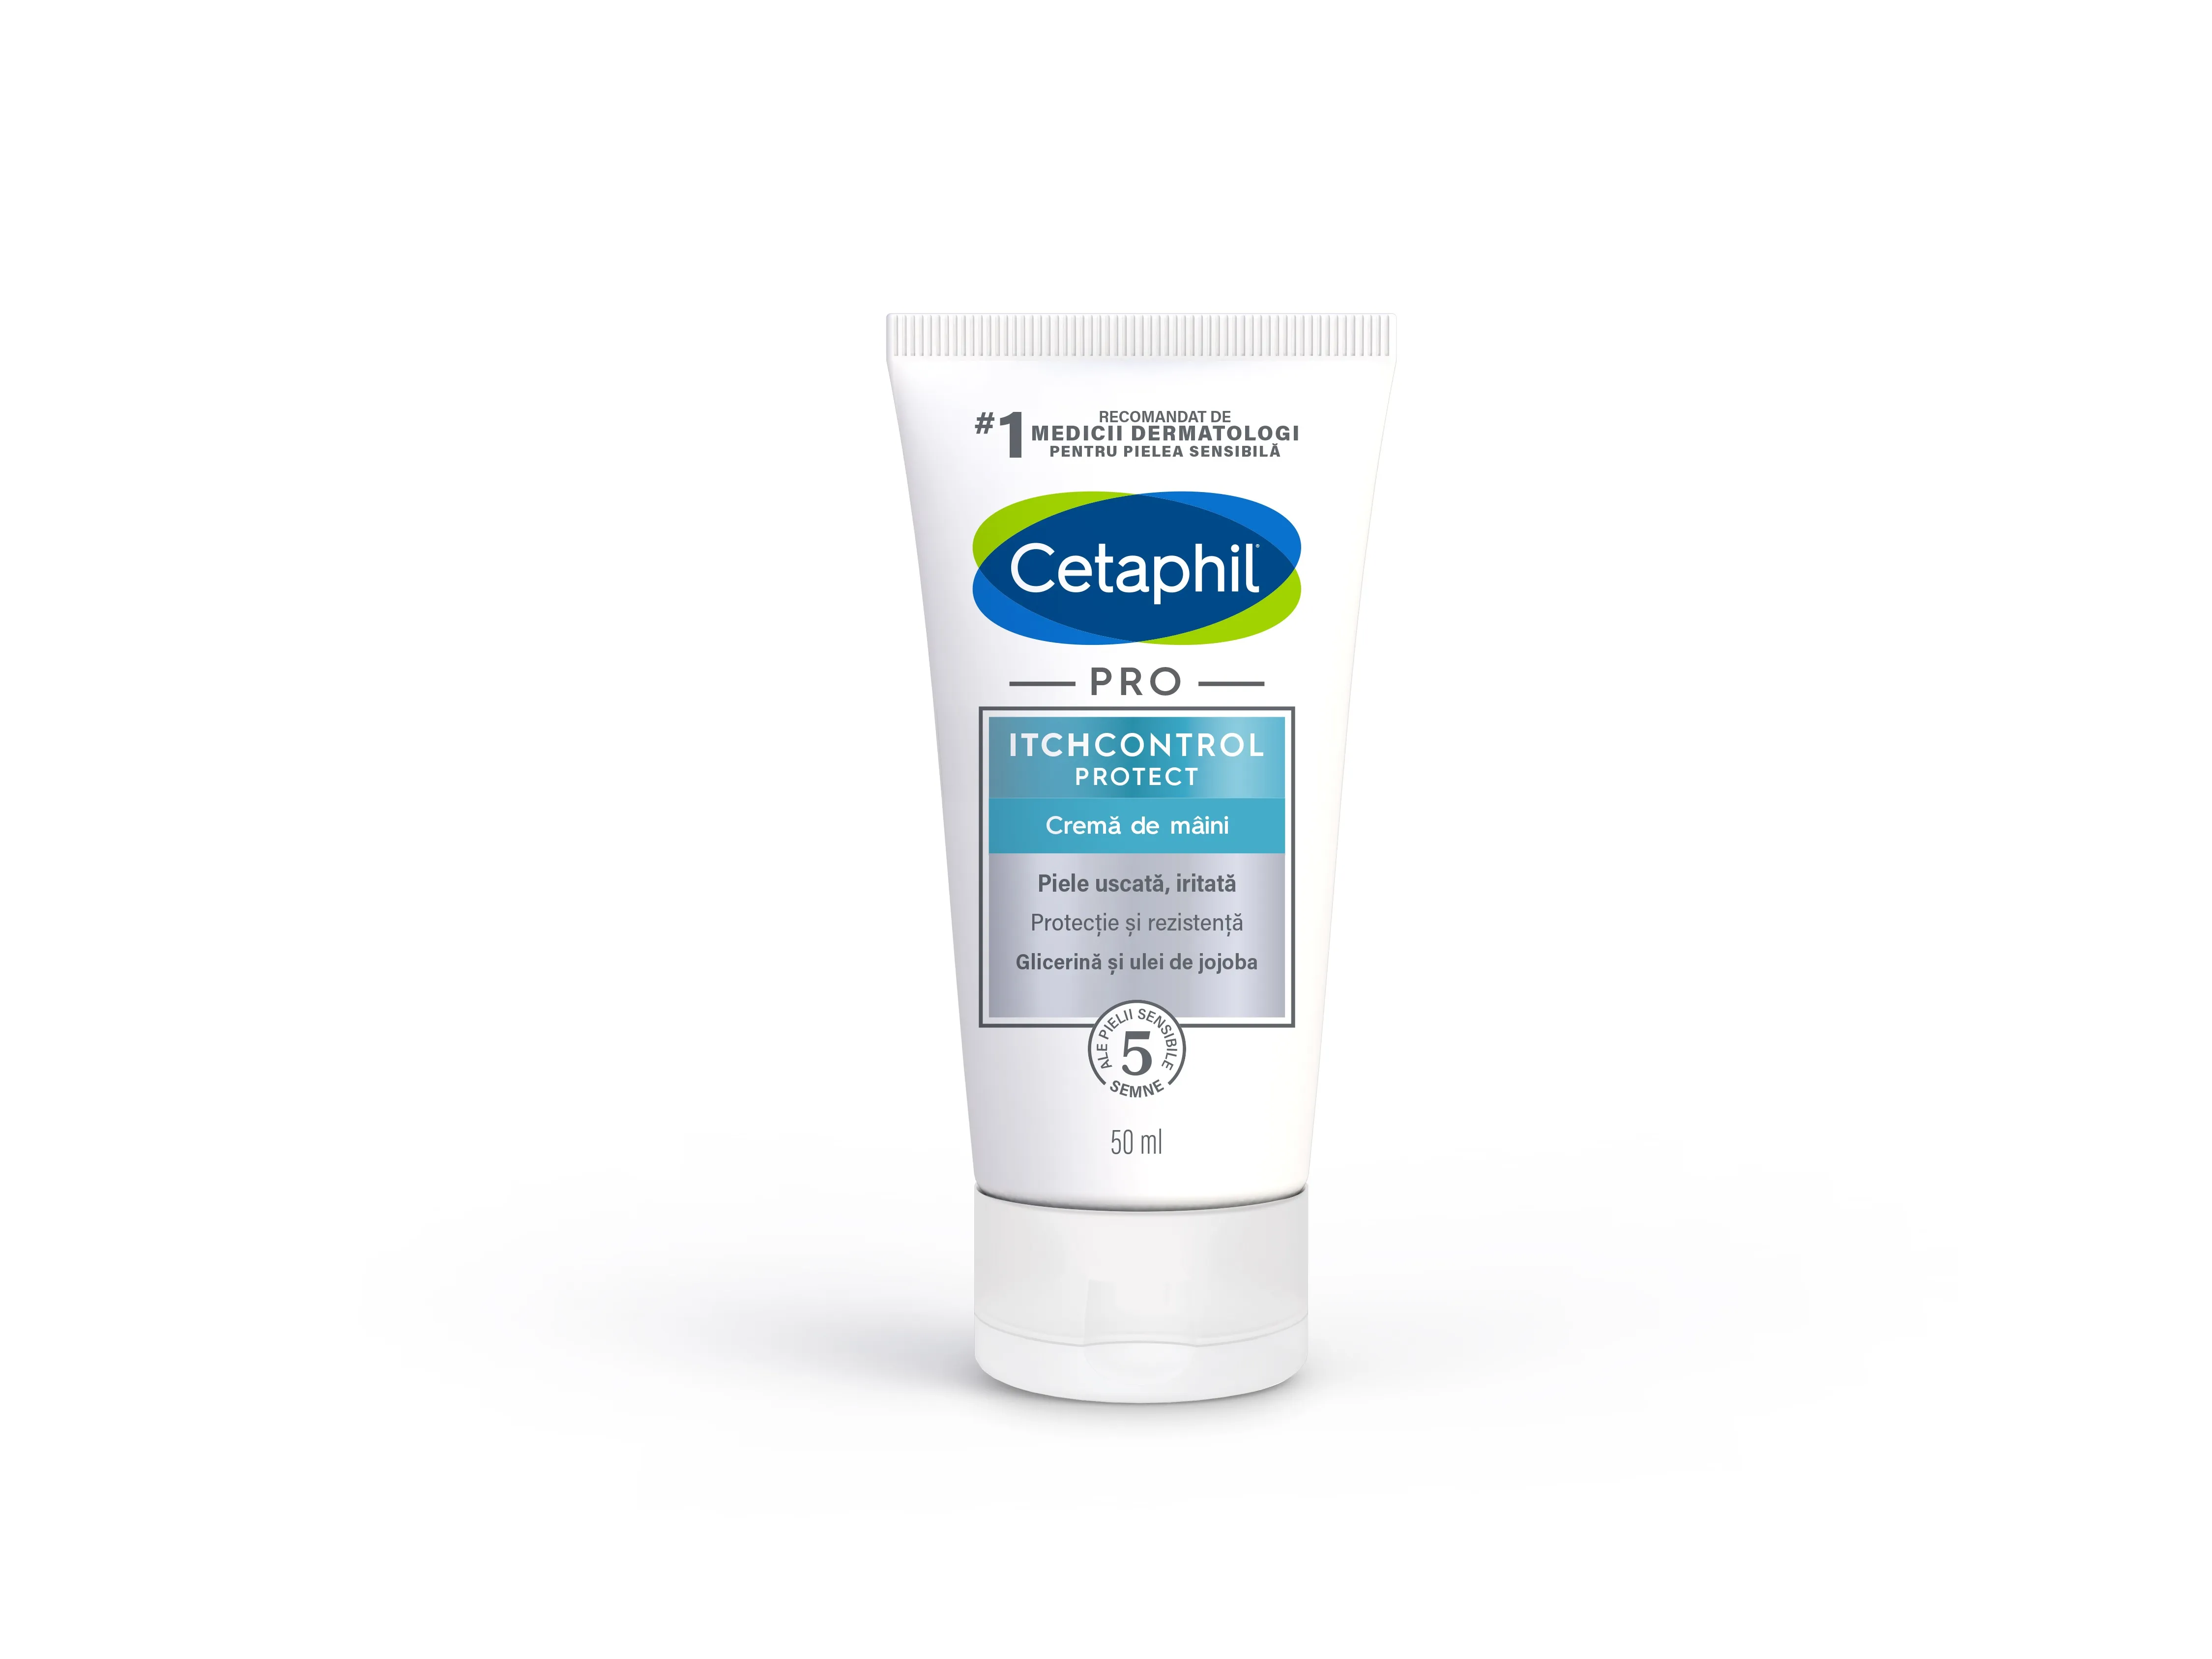 CETAPHIL PRO ITCH CONTROL PROTECT 50ML